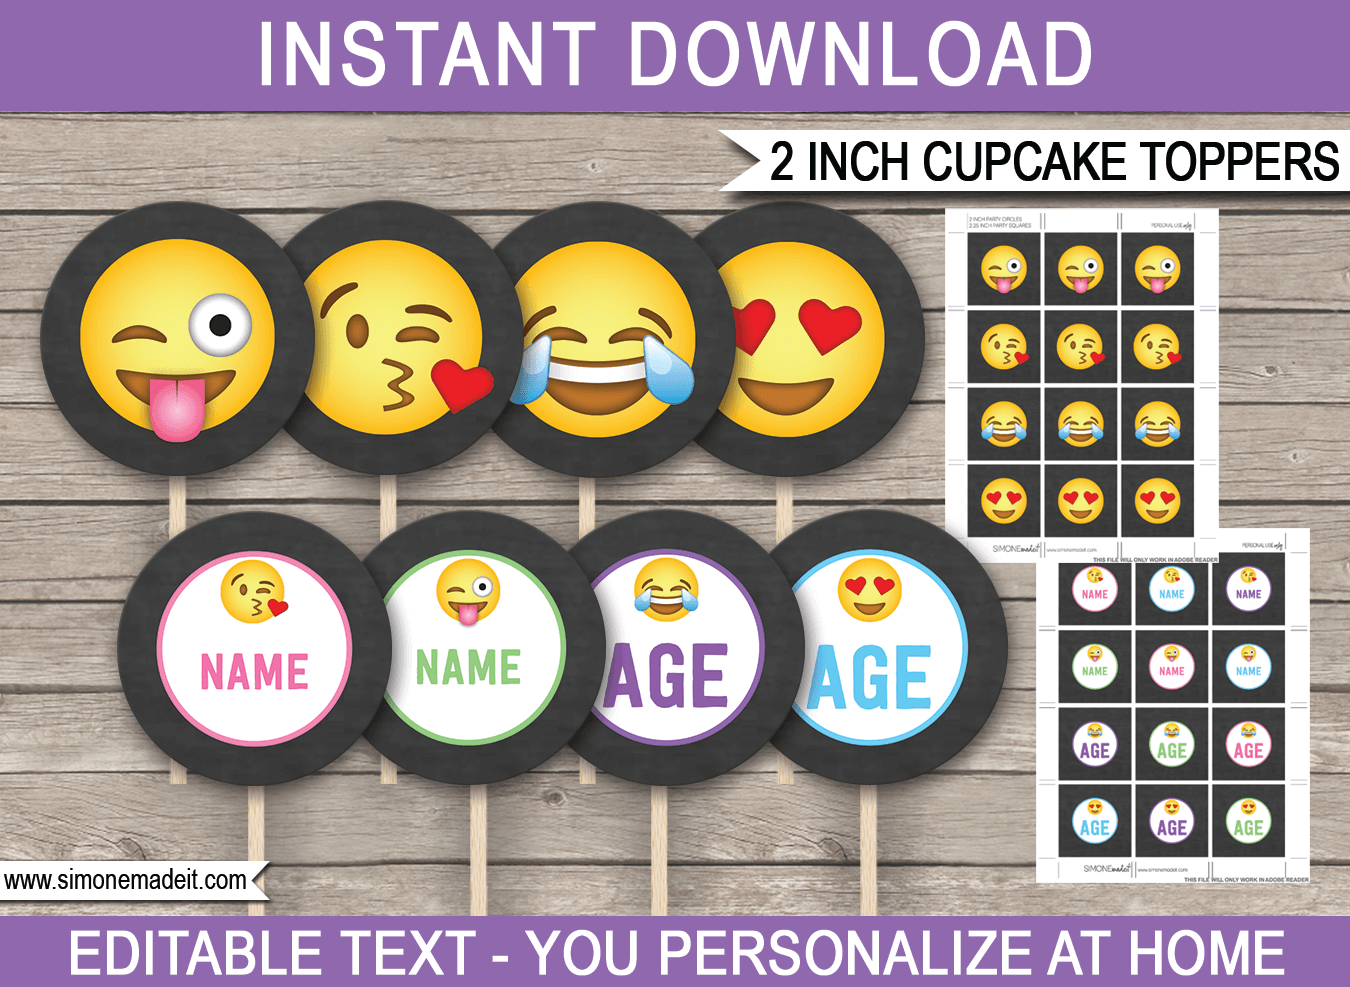 Printable Emoji Cupcake Toppers Template | Emoji Birthday Party Theme for girls | 2 inch | Gift Tags | DIY Editable & Printable Template | INSTANT DOWNLOAD via simonemadeit.com